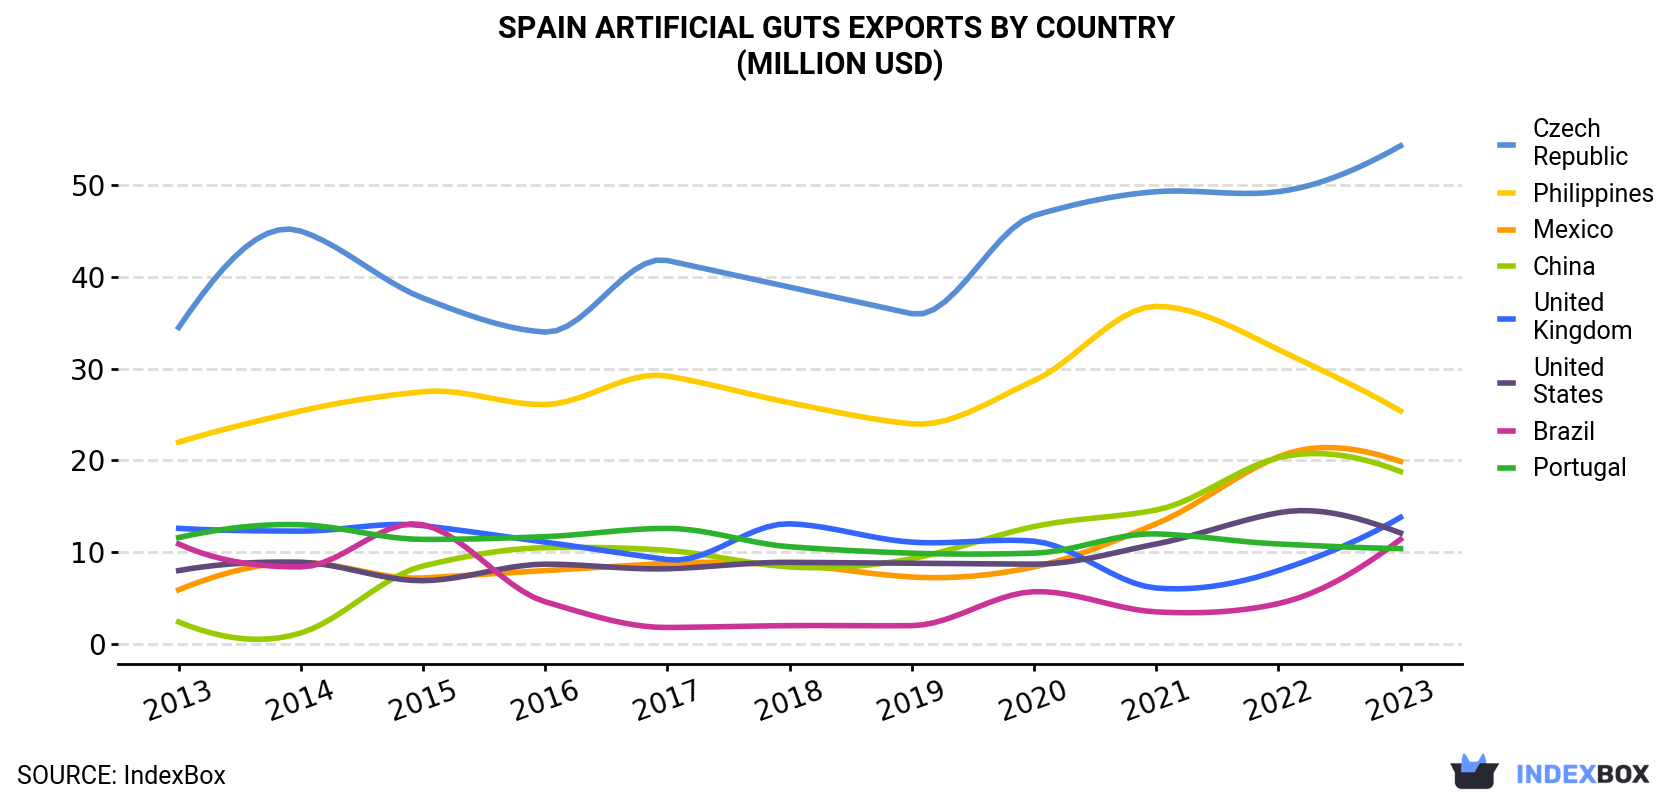 Spain Artificial Guts Exports By Country (Million USD)